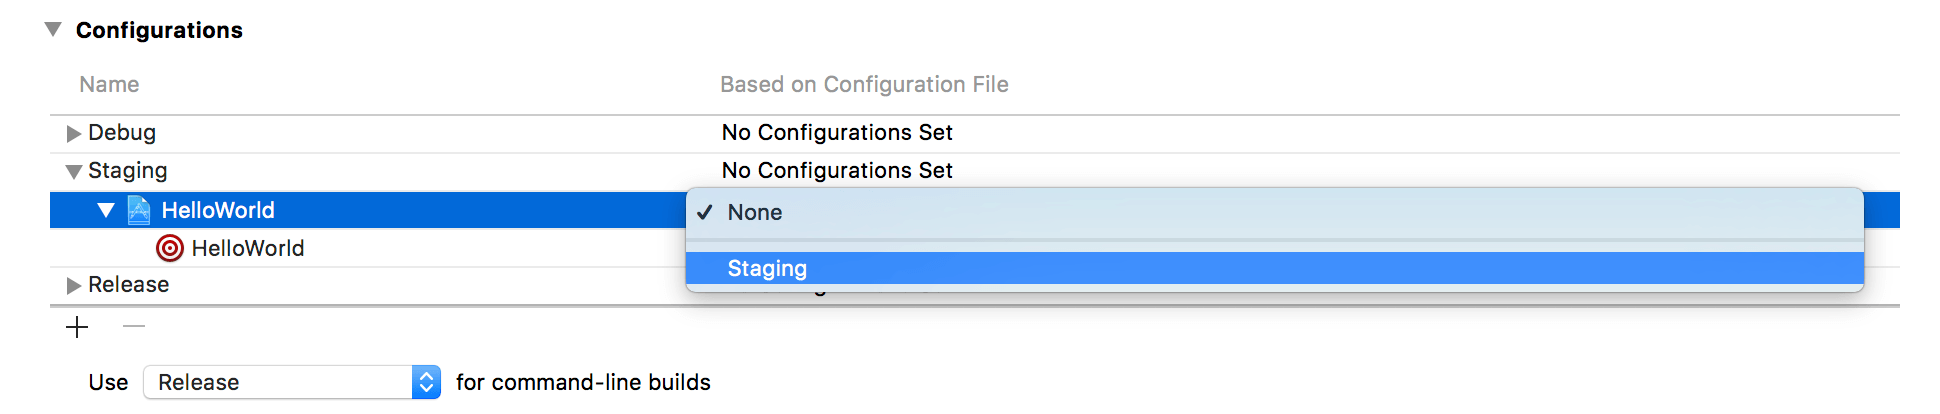 staging-configuration-file